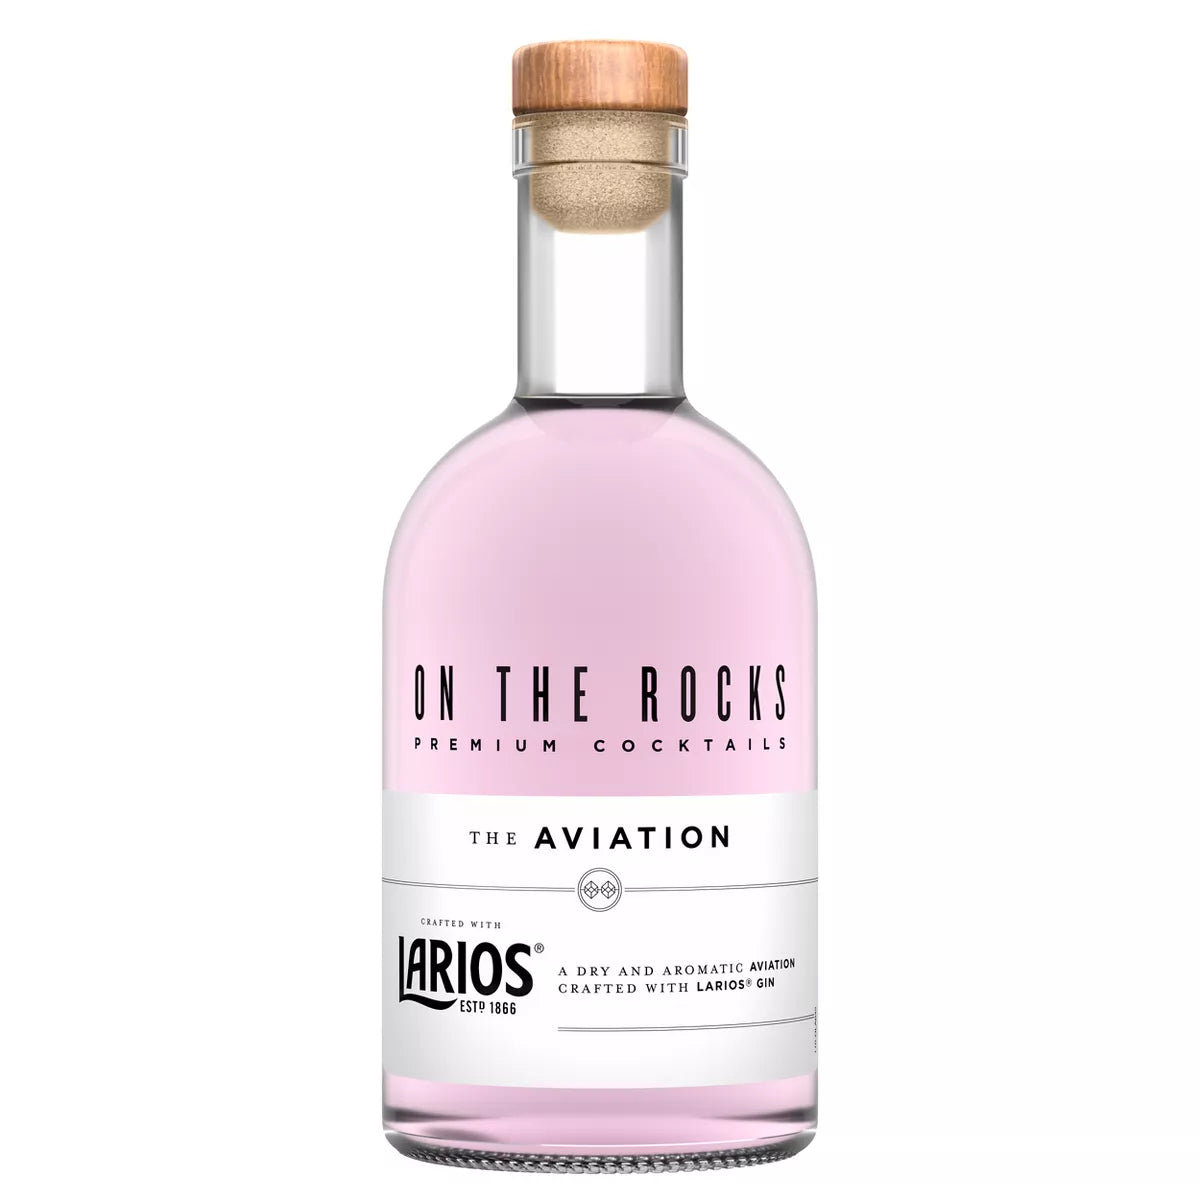 Otr-On the Rocks the Aviation Cocktail Crafted with Larios Gin 375ml